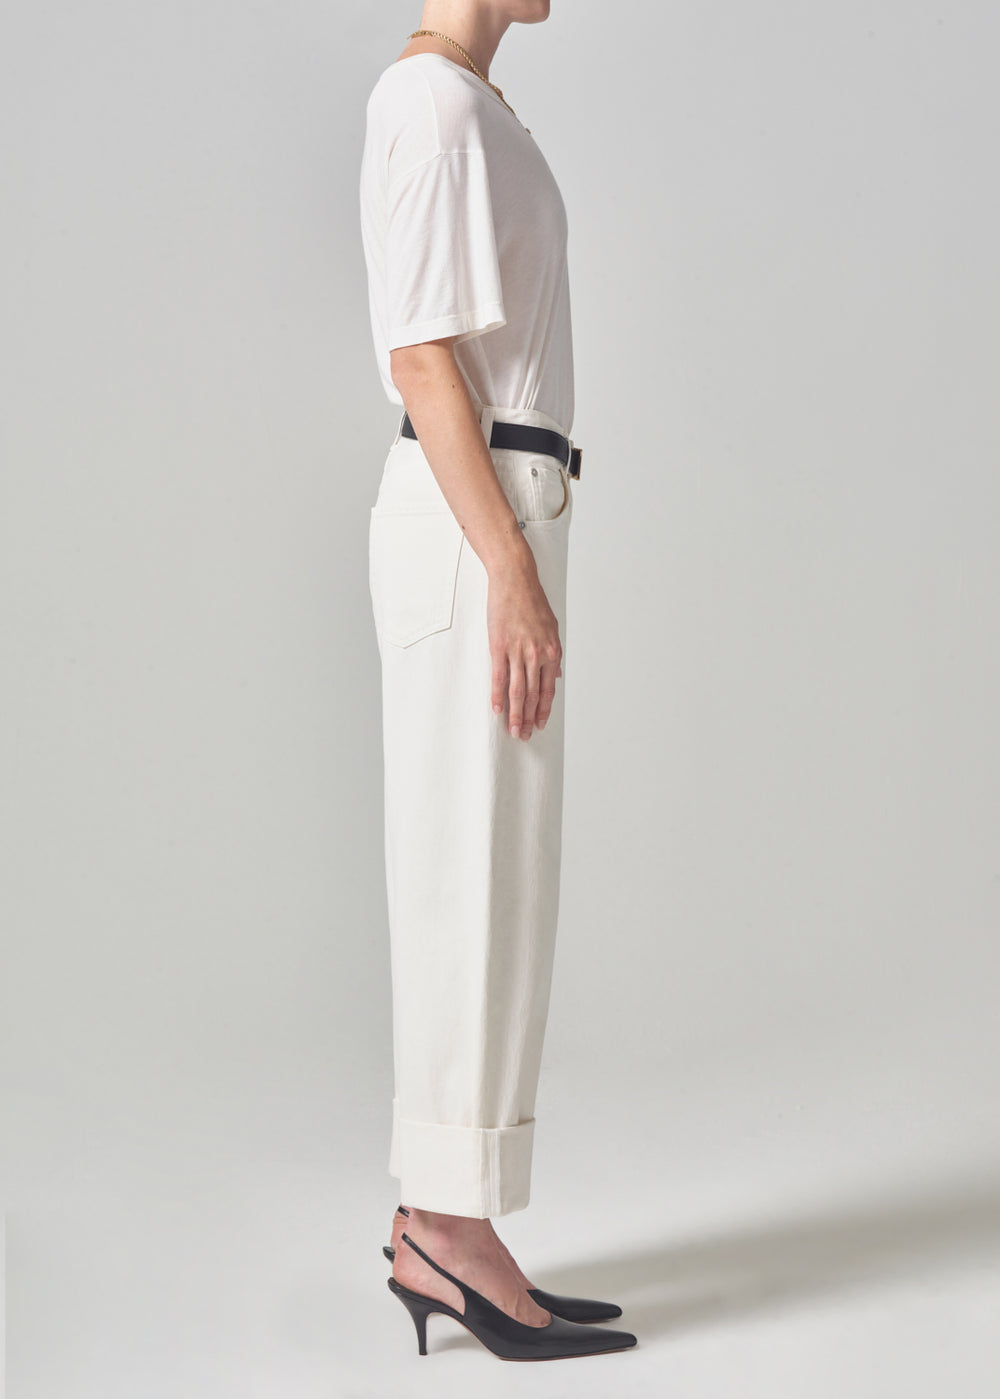 The Citizens of Humanity Ayla Baggy Cuffed Crop Jean in Pashmina available at The New Trend Australia